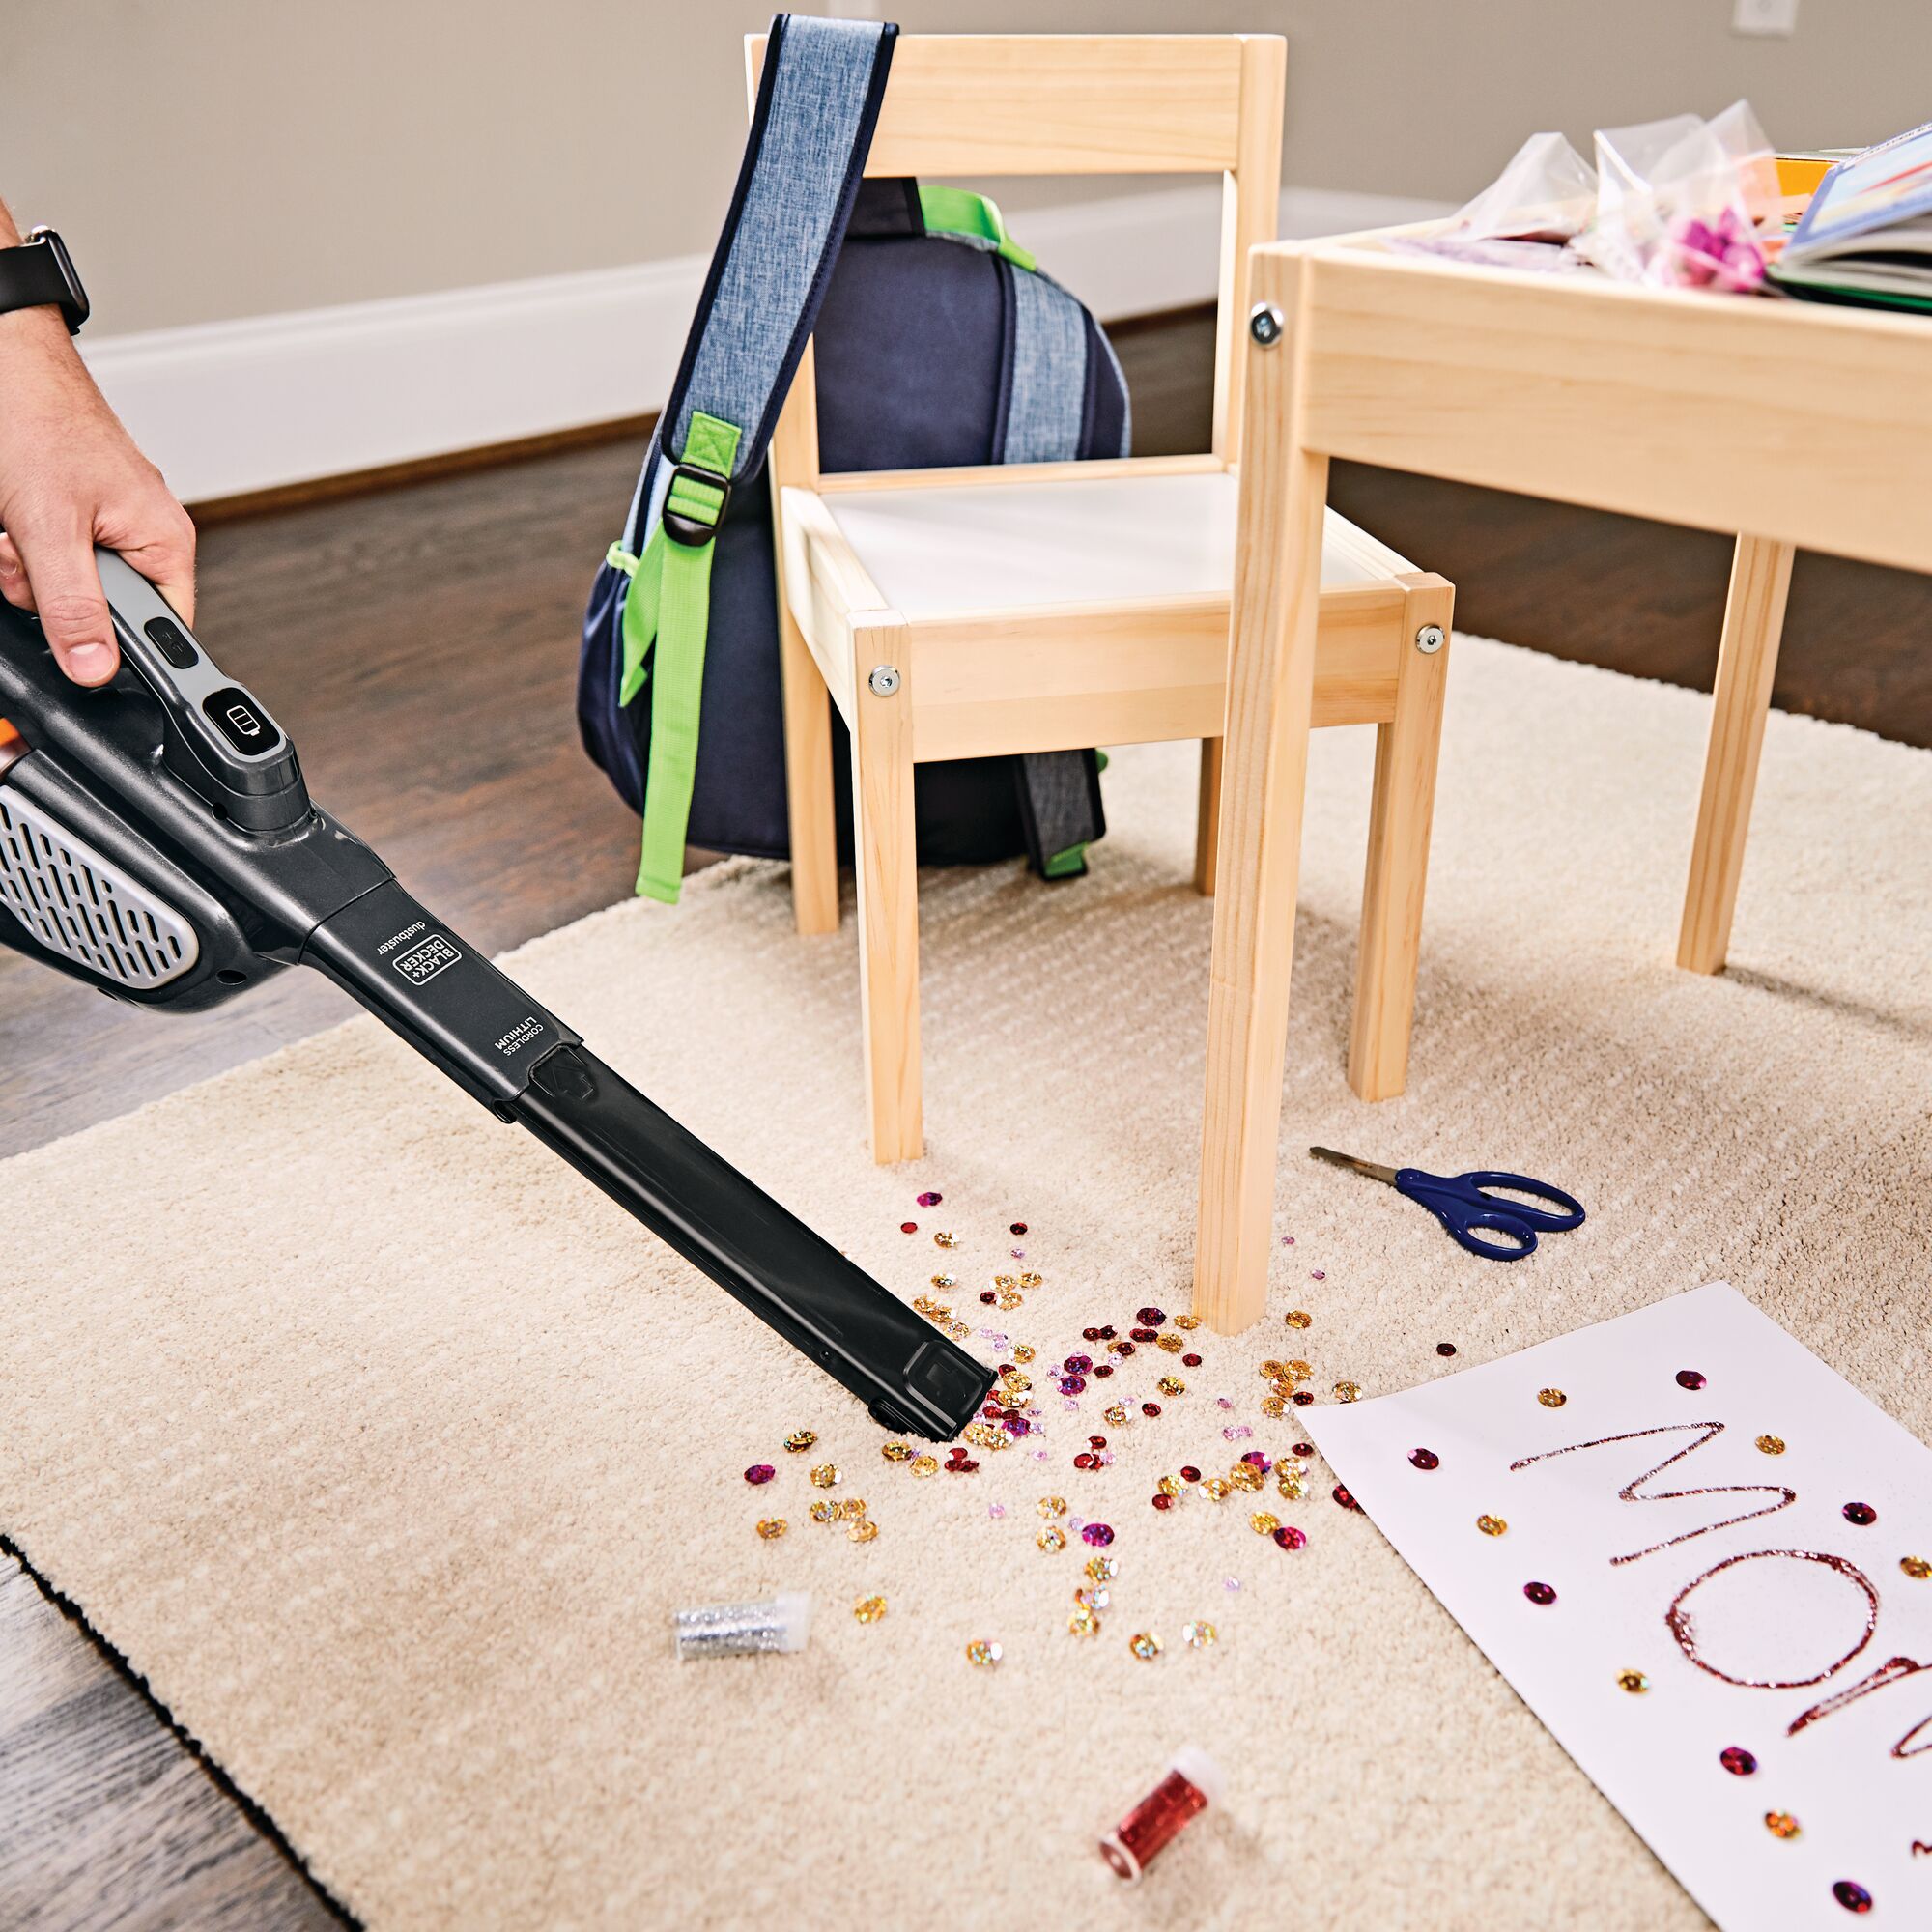 16 Volt MAX dustbuster Advanced Clean plus Hand Vacuum being used to clean mess from carpet after children have done their crafts.